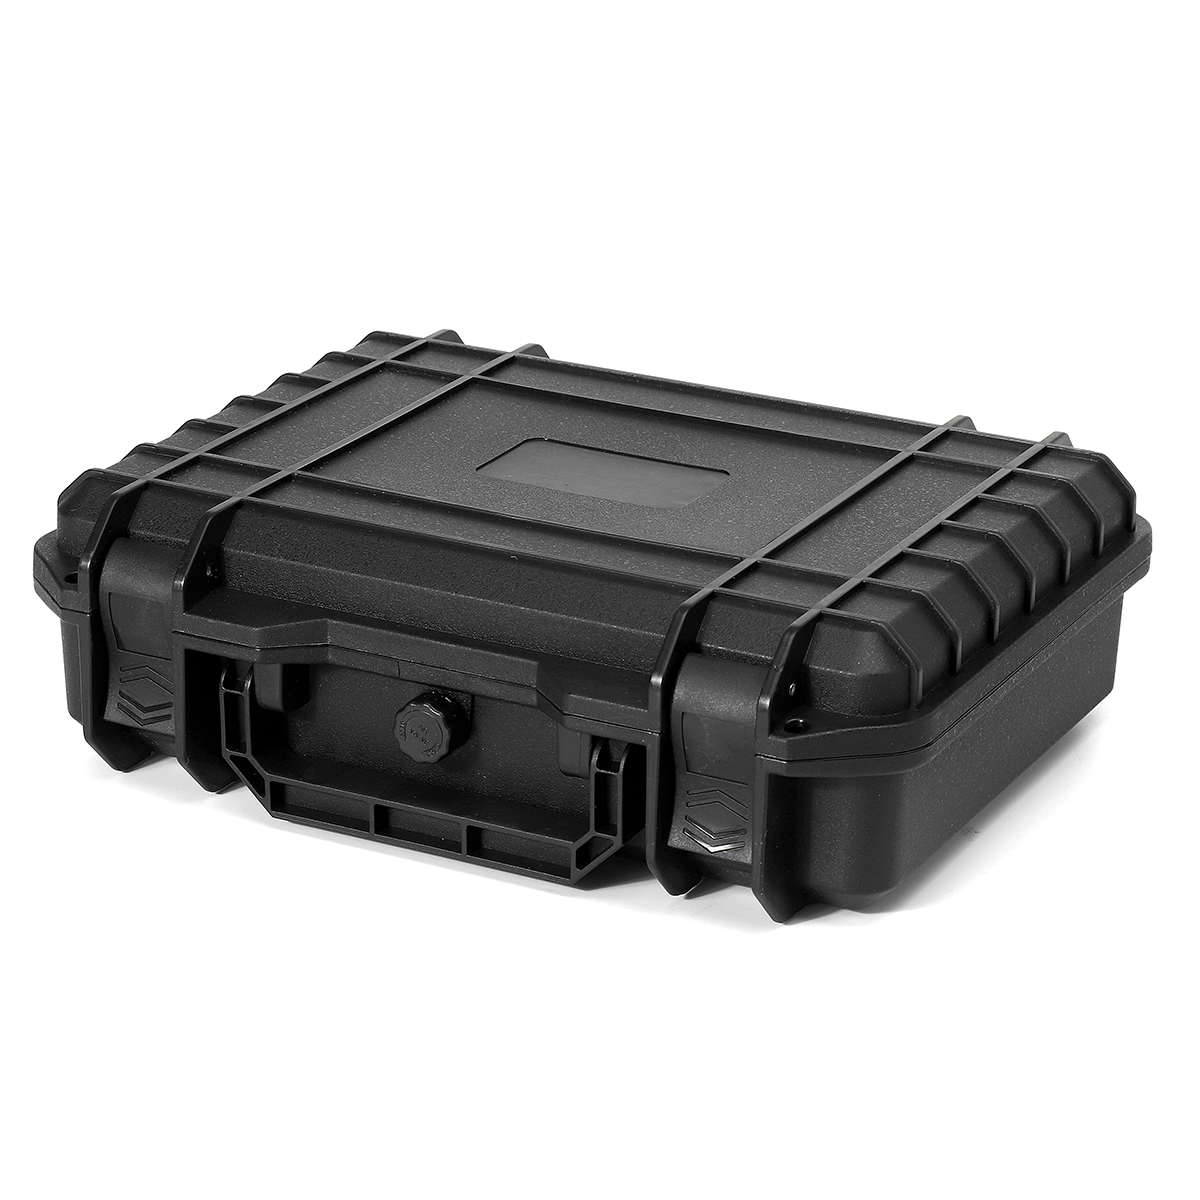 Waterproof-Hard-Carrying-Case-Bag-Tool-Storage-Box-Camera-Photography-with-Sponge-1664833-6